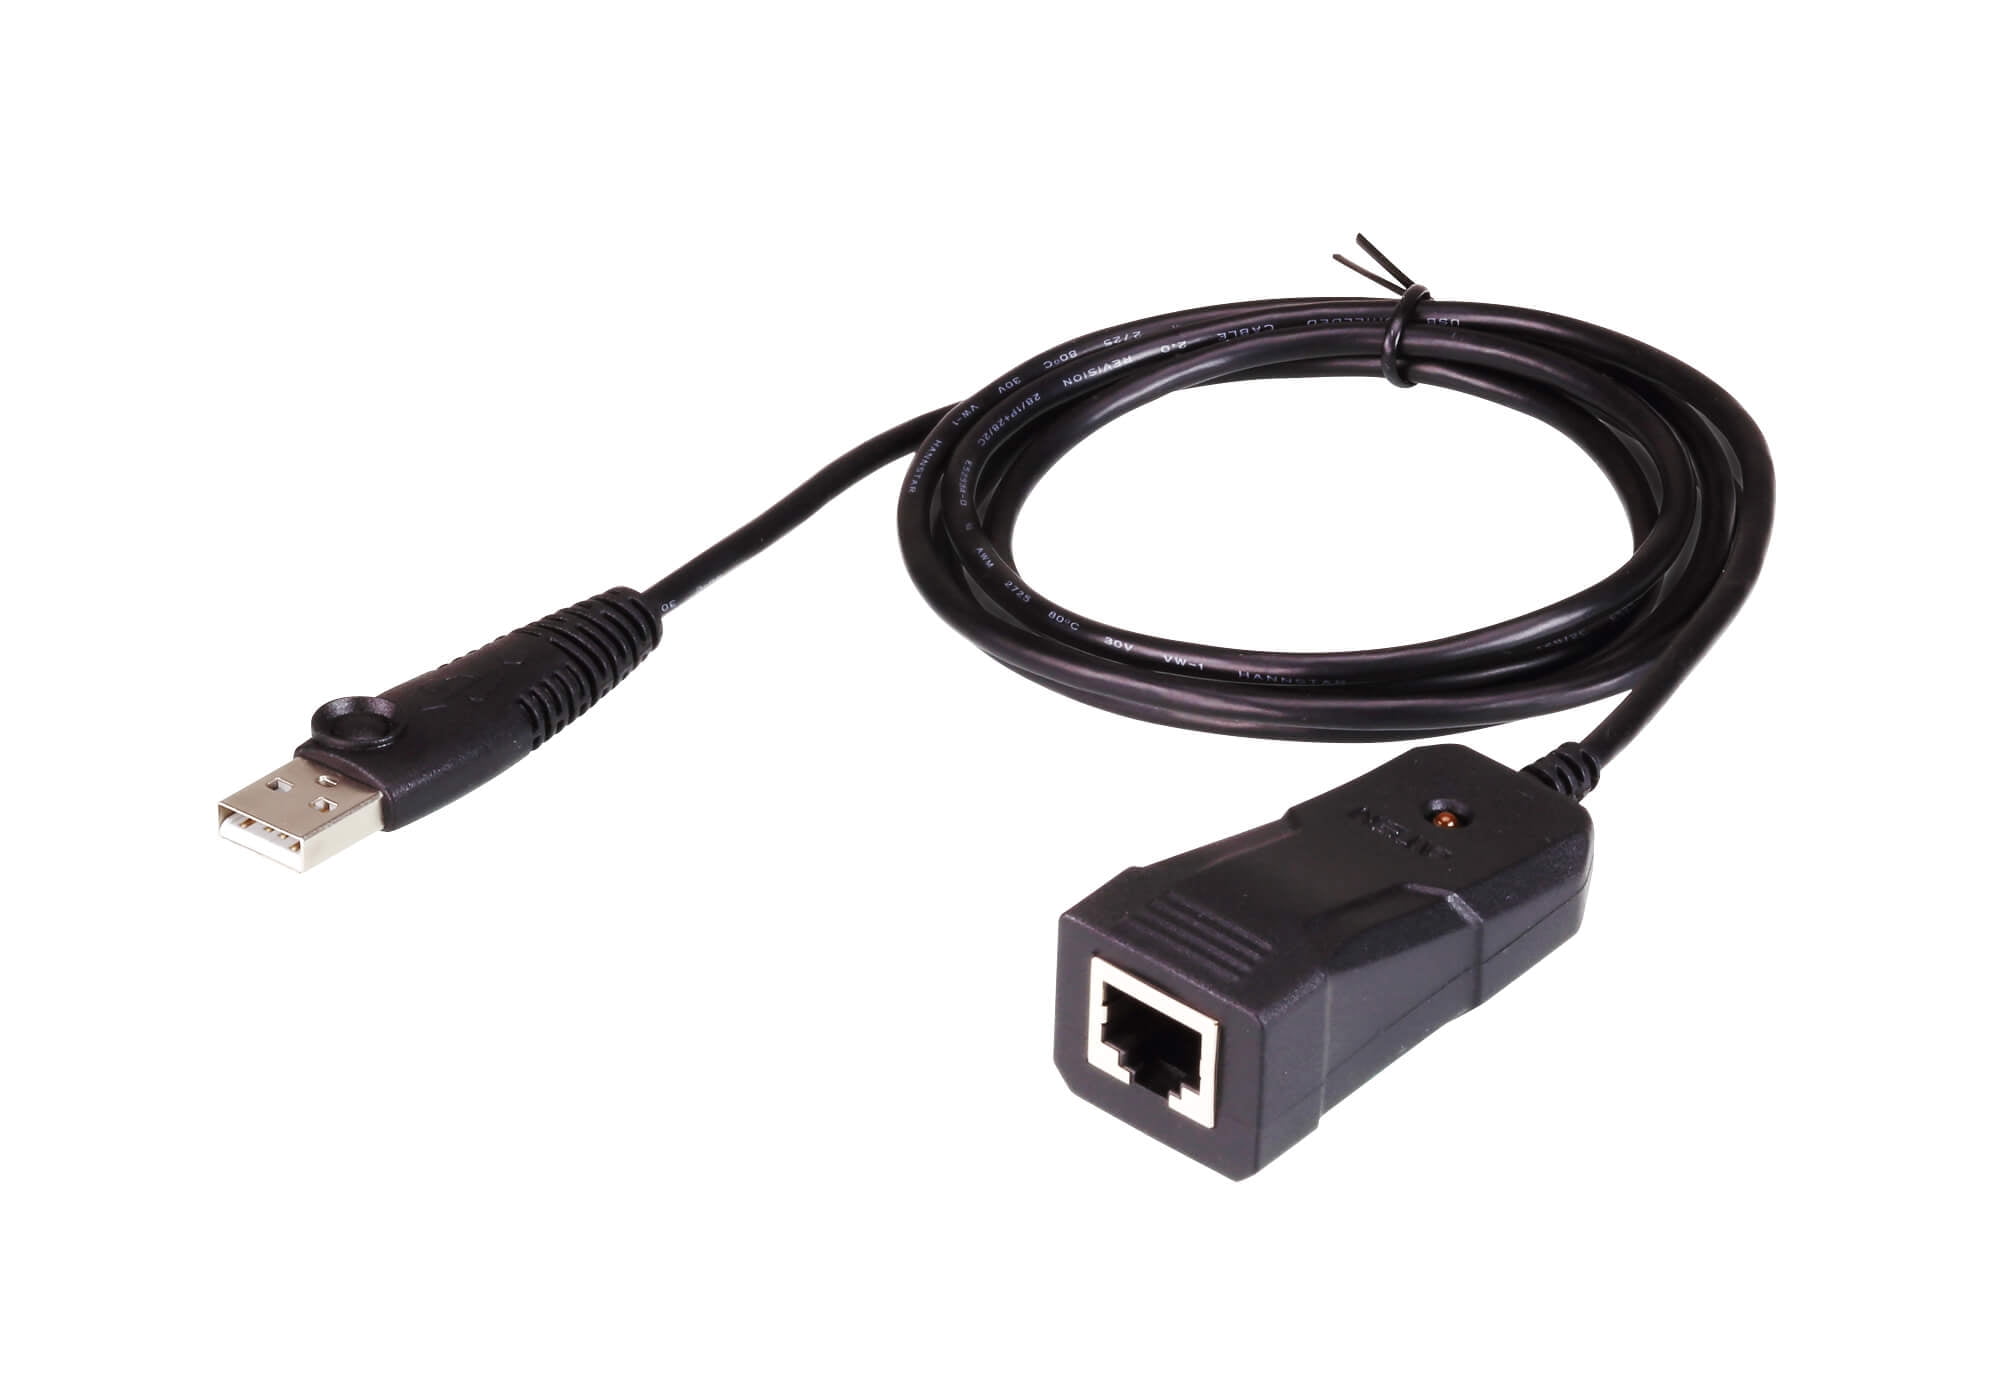 Picture of Aten UC232B USB to RJ-45 RS-232 Console Adapter